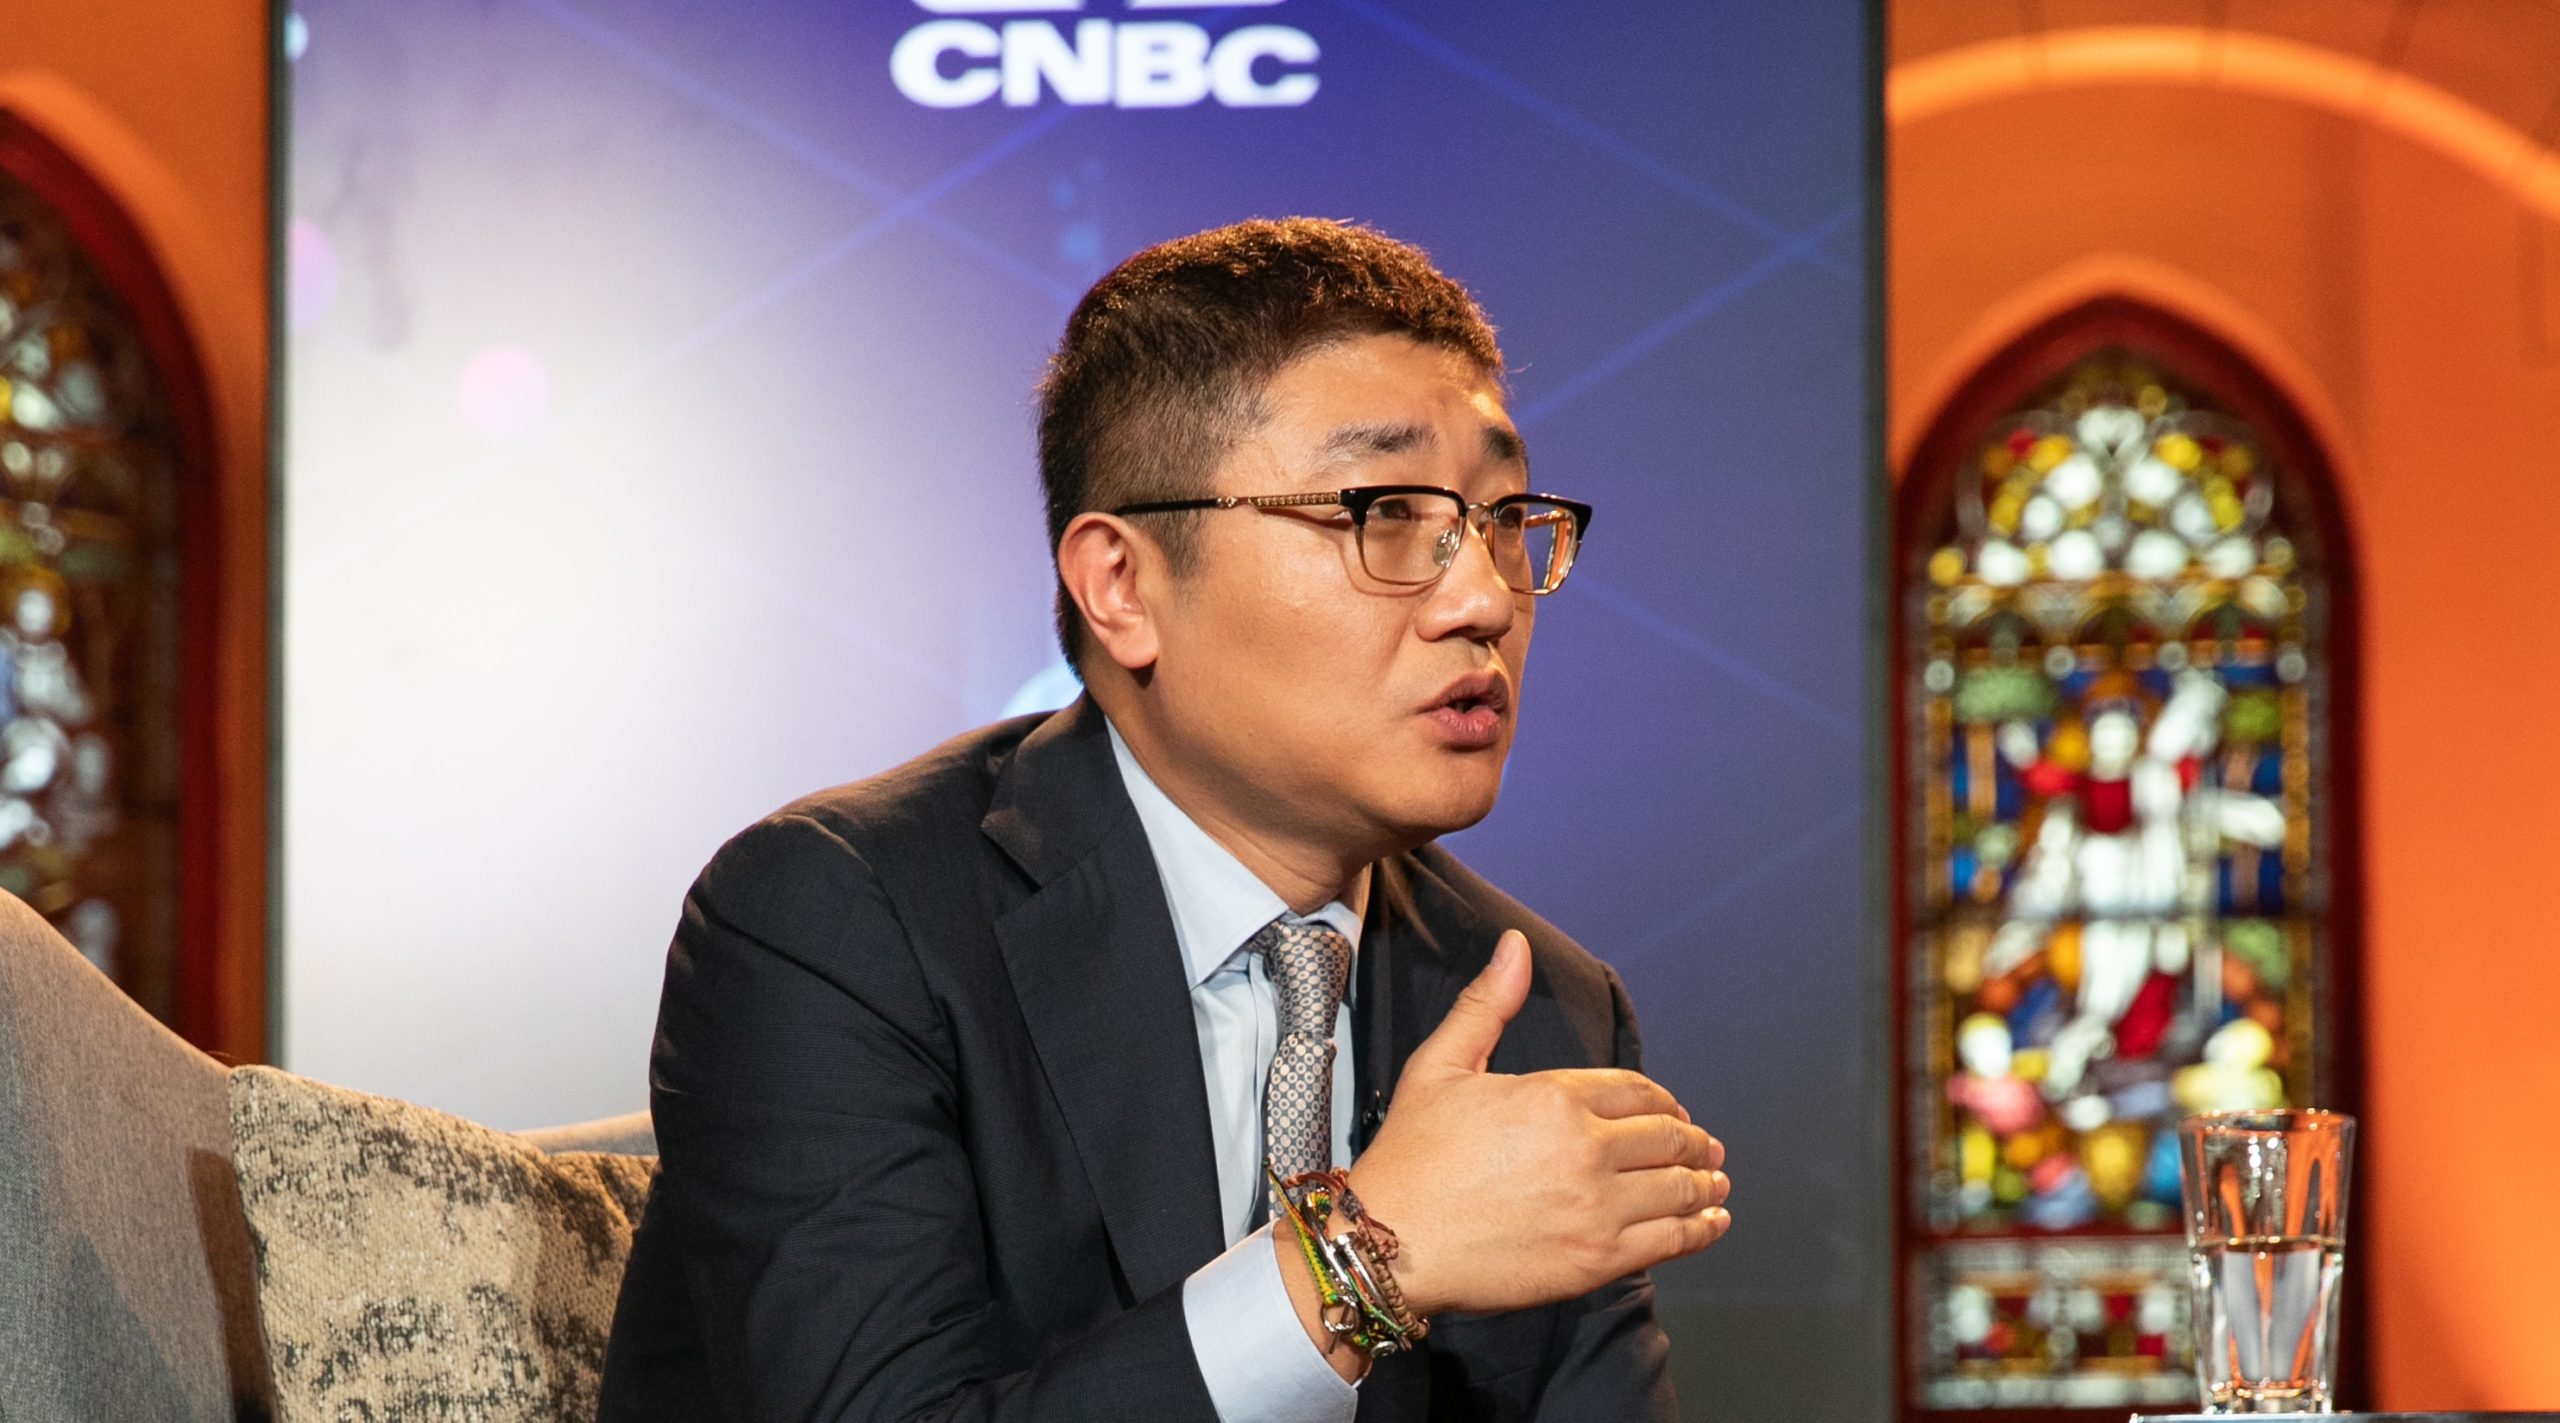 JD.com’s CEO Lei Xu Named Among Most Influential Chinese Entrepreneurs of 2022